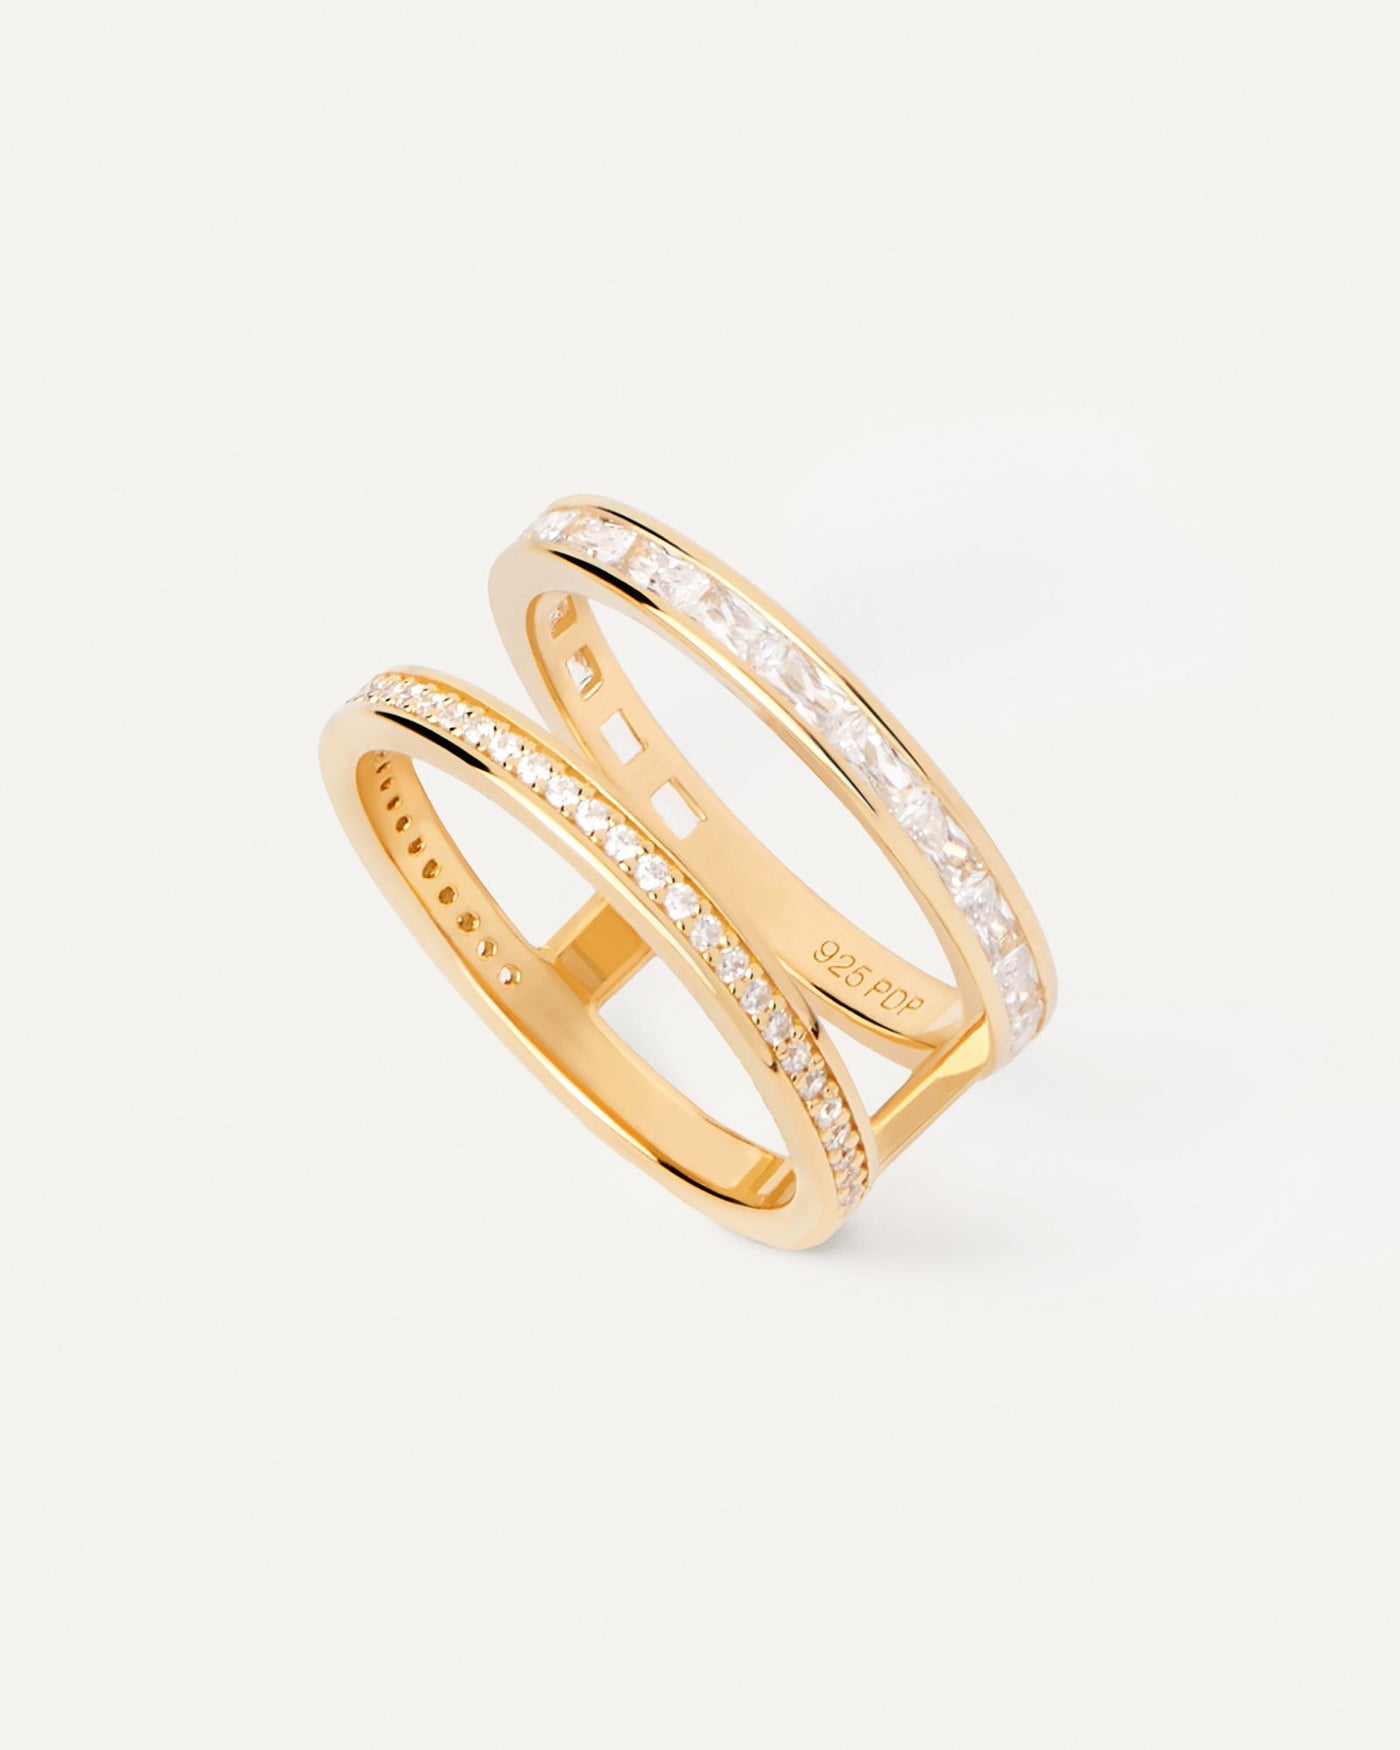 2024 Selection | Bianca Ring. Gold-plated double band ring set with white zirconia. Get the latest arrival from PDPAOLA. Place your order safely and get this Best Seller. Free Shipping.